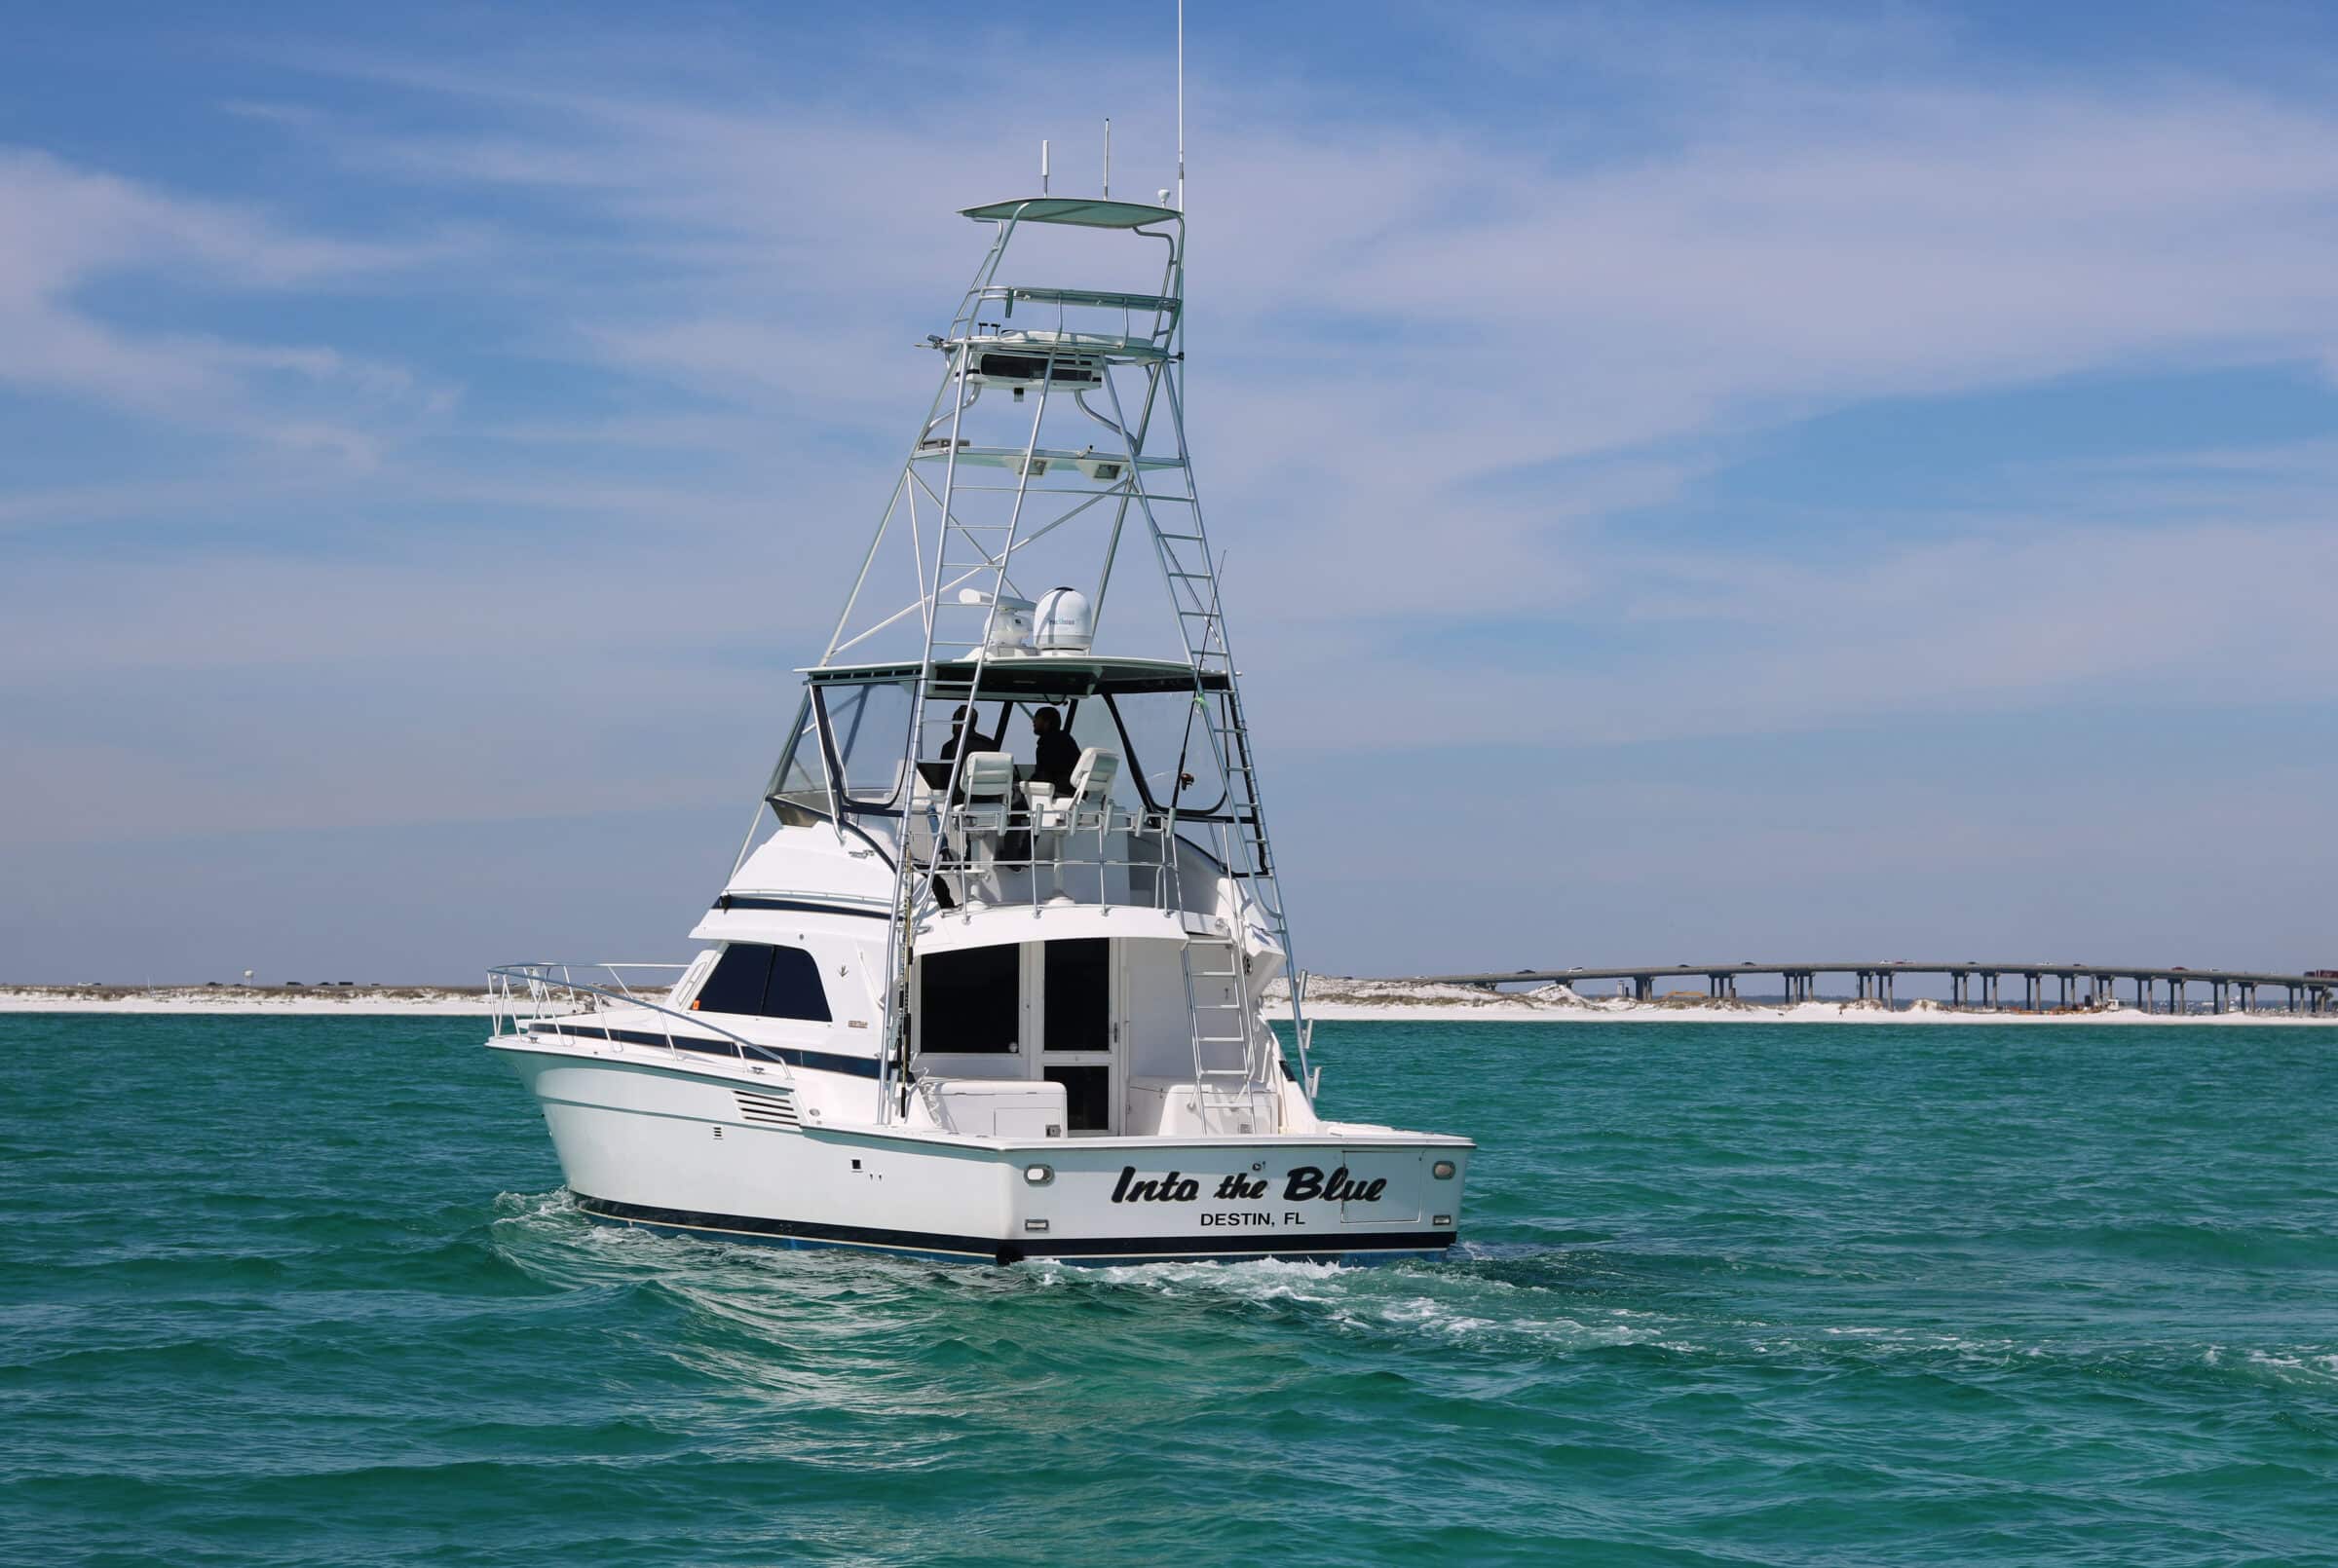 Destin Fishing Charters - Overnight Fishing Charter On The Gulf Of Mexico